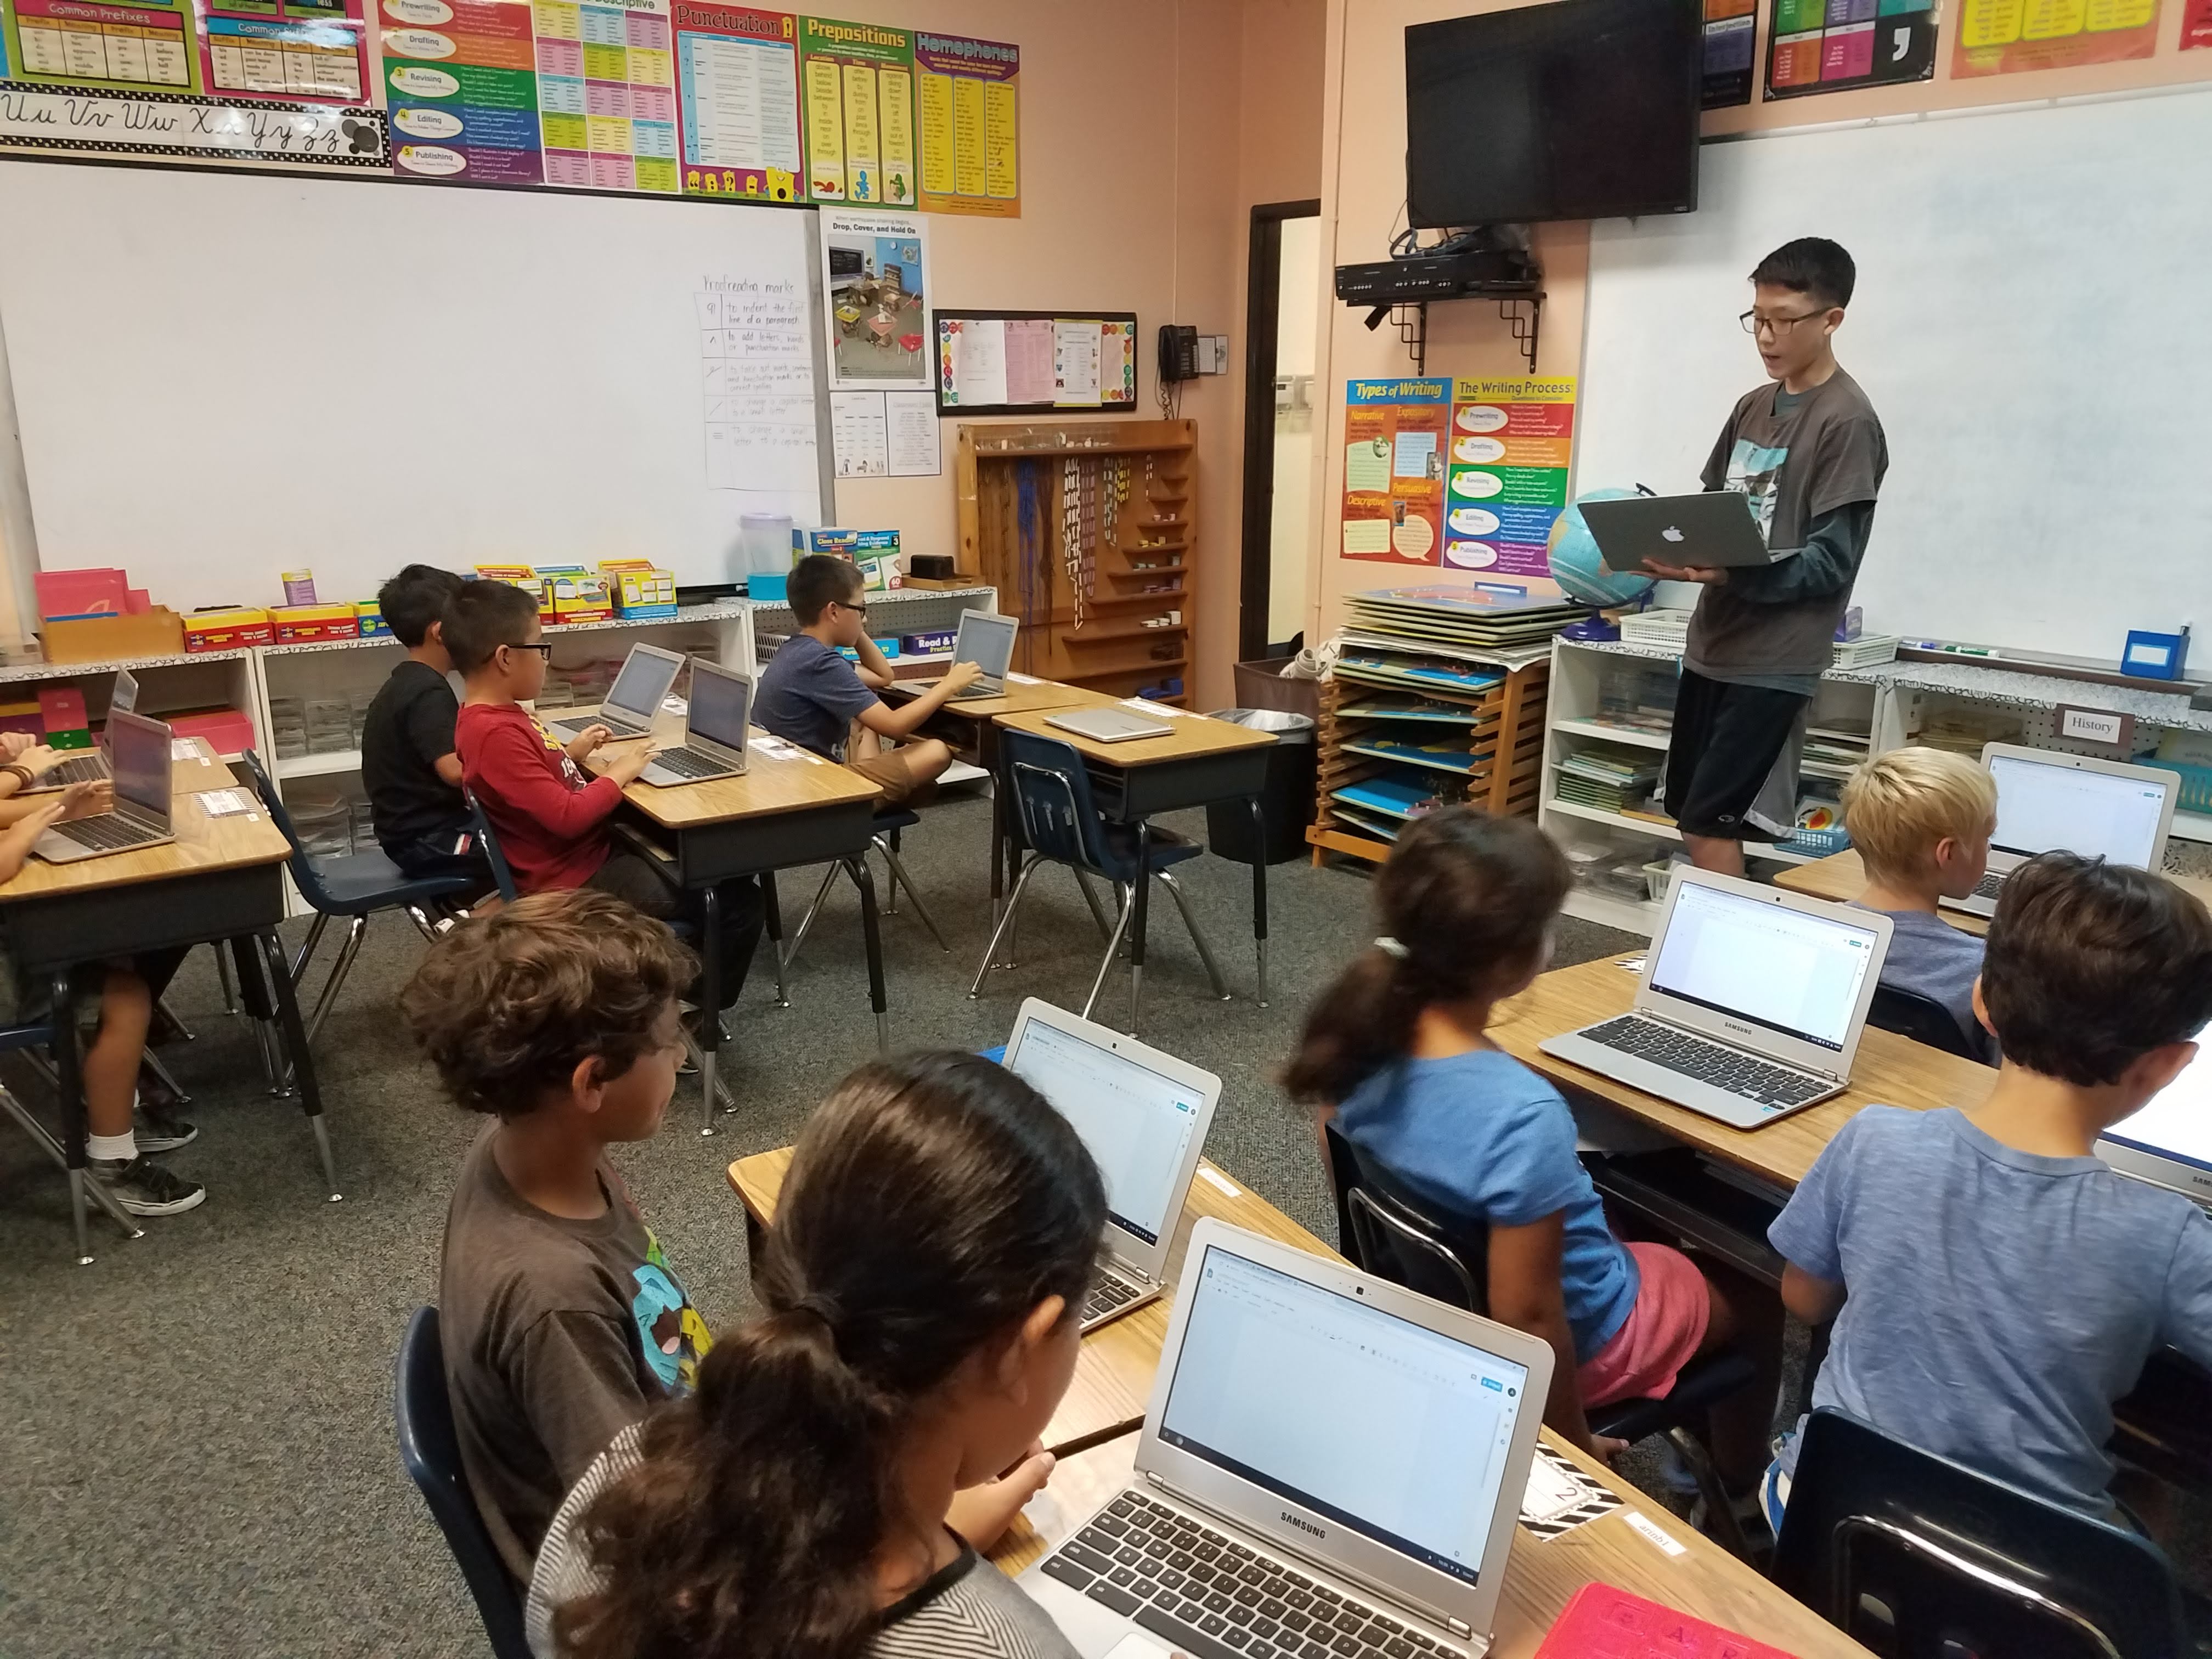 Teaching G Suite at Local Elementary School